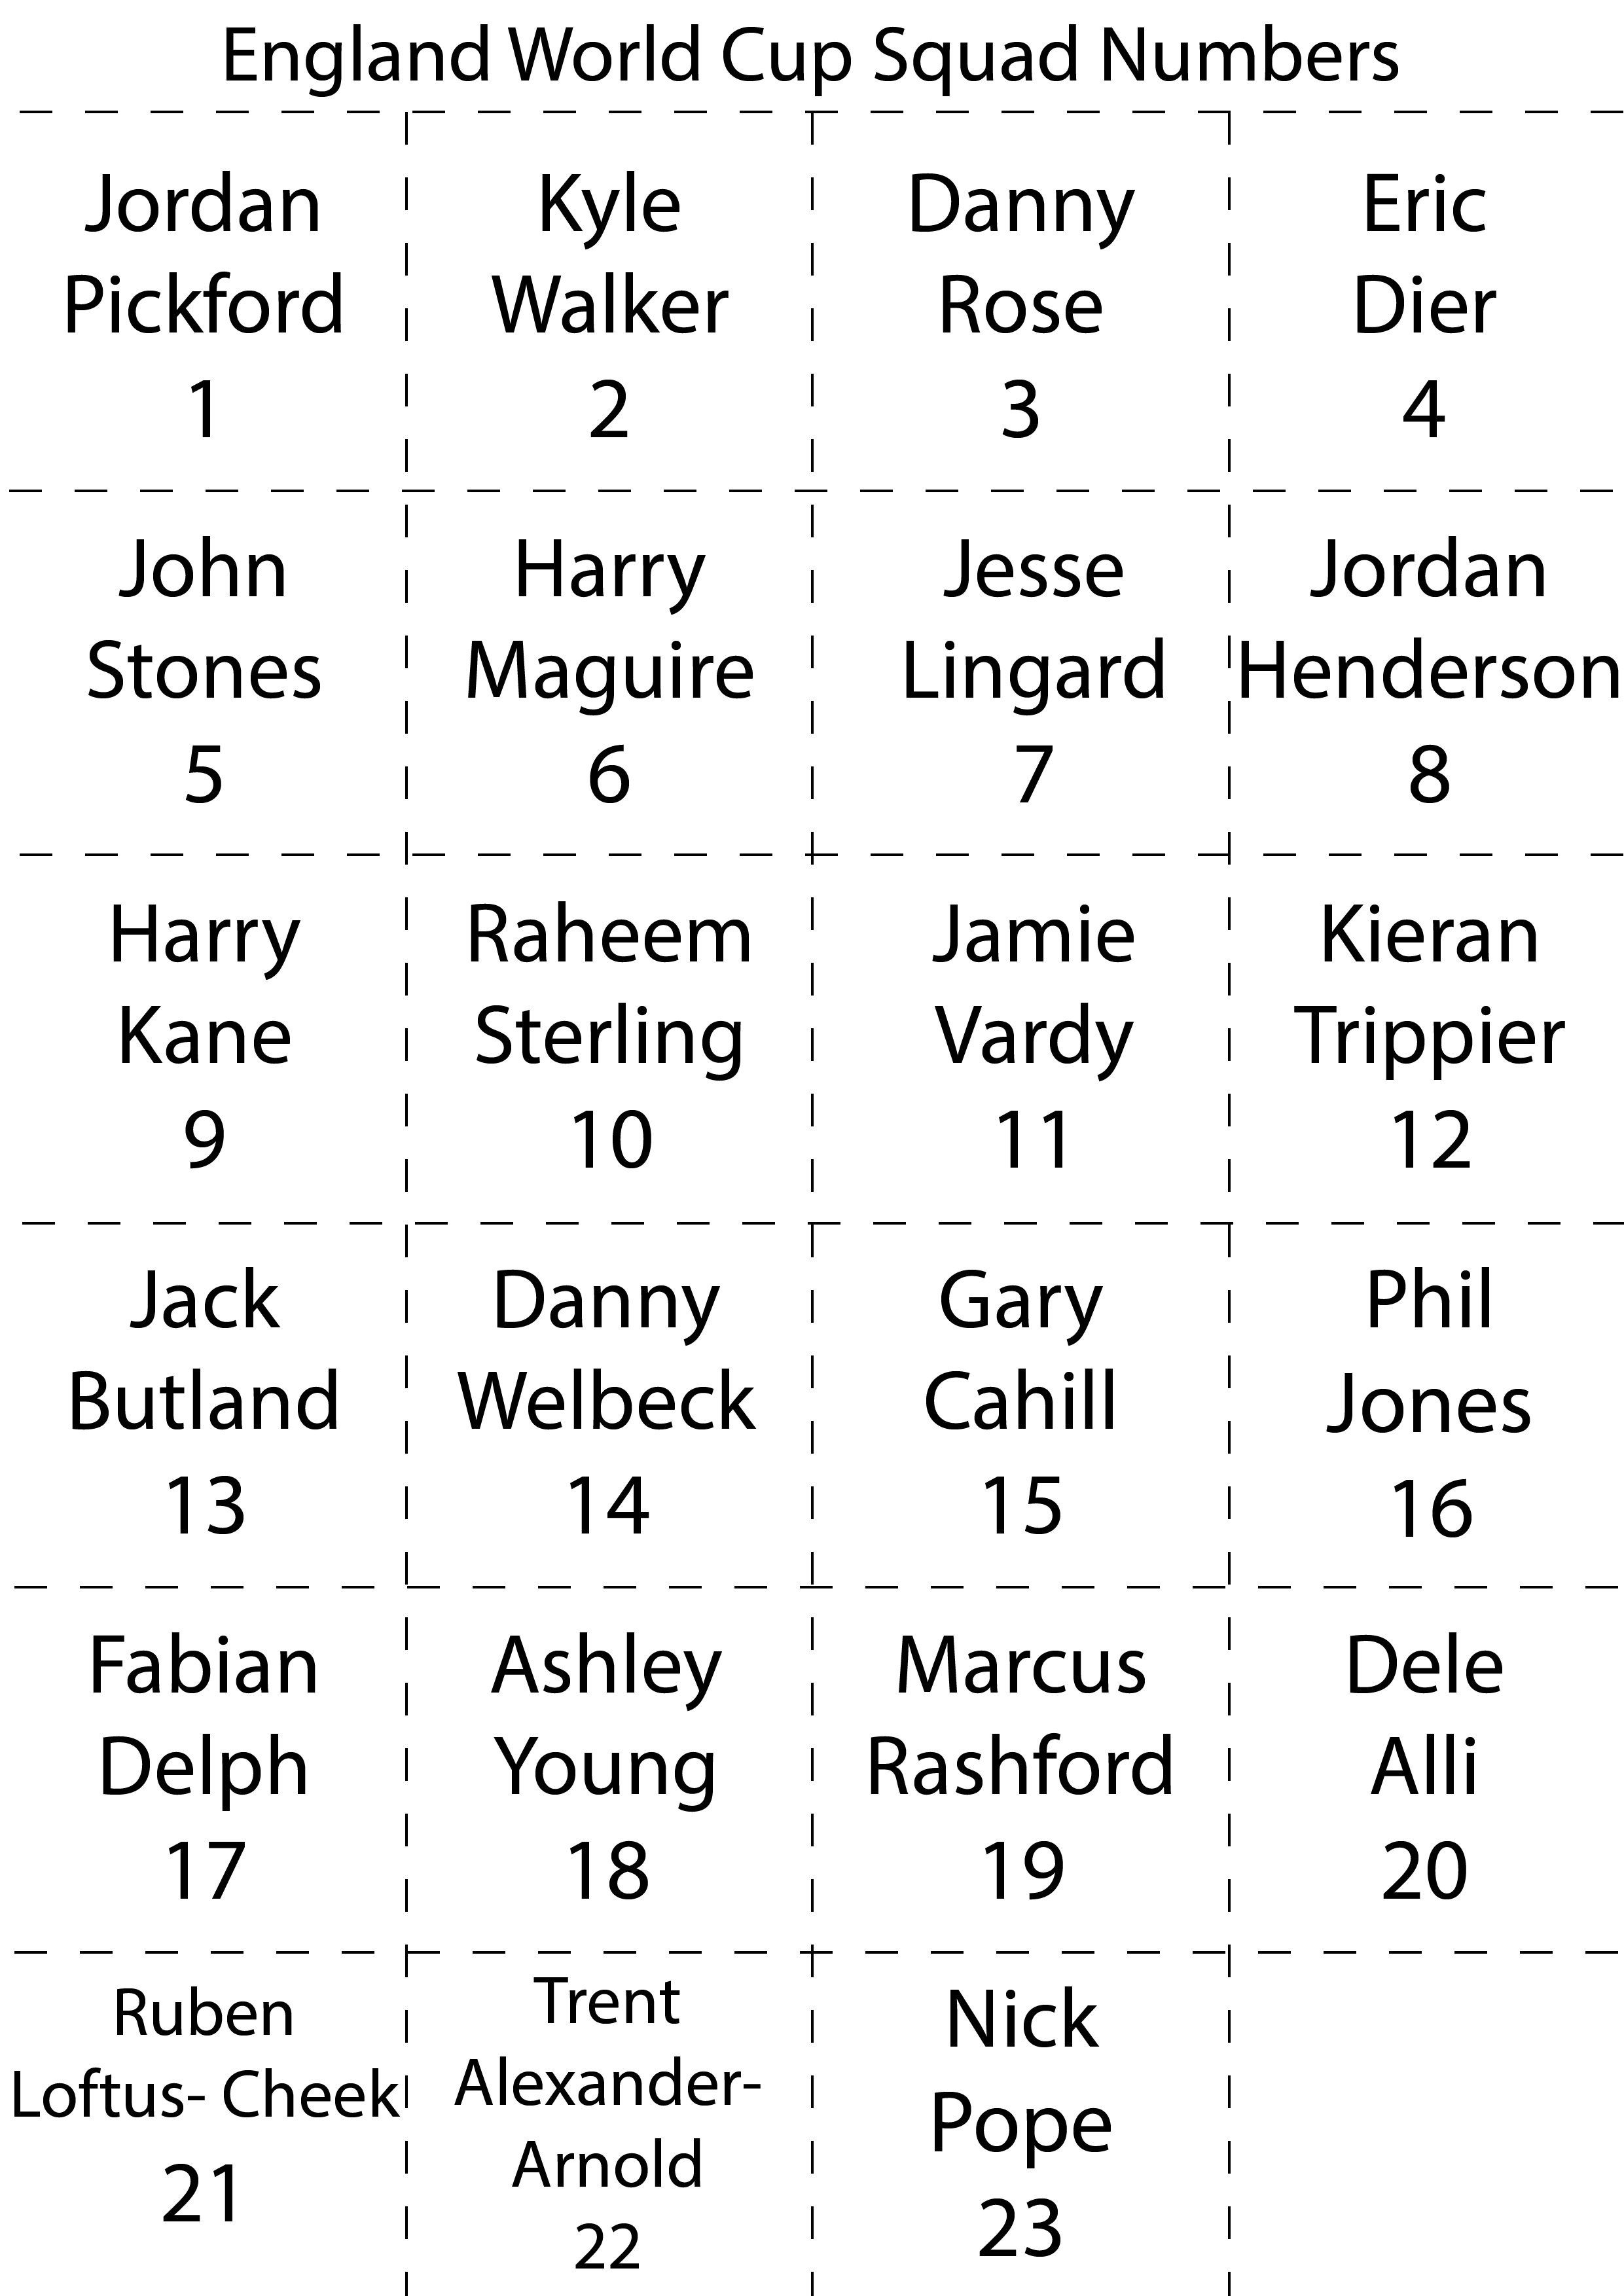 England Squad Numbers - Maths Game